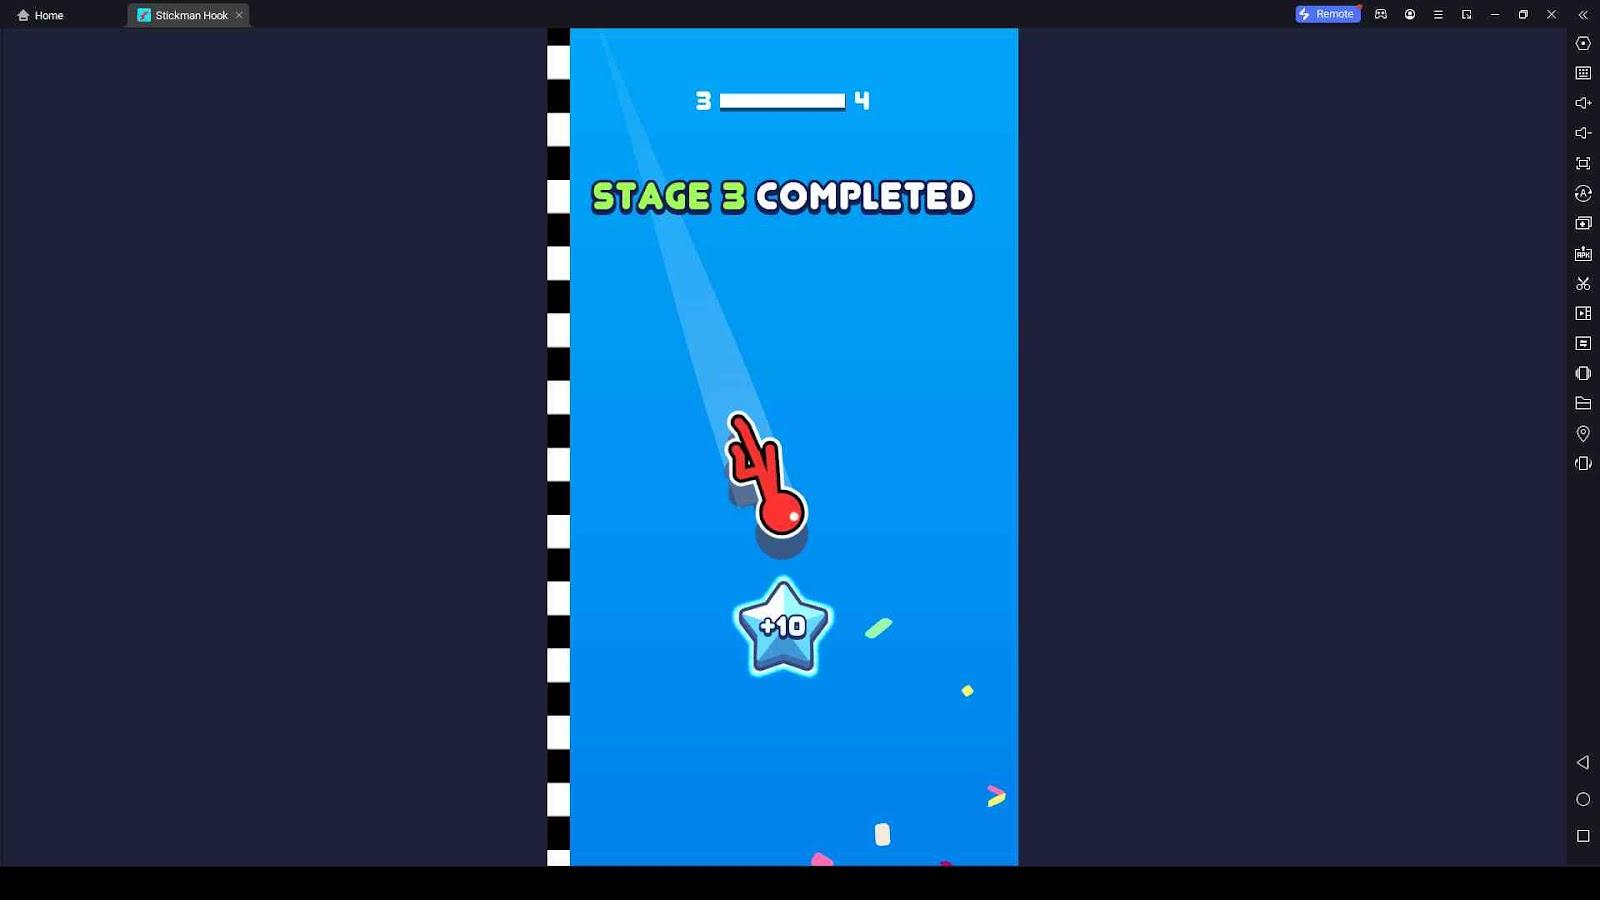 Complete More Stages to Reach Higher Ranks